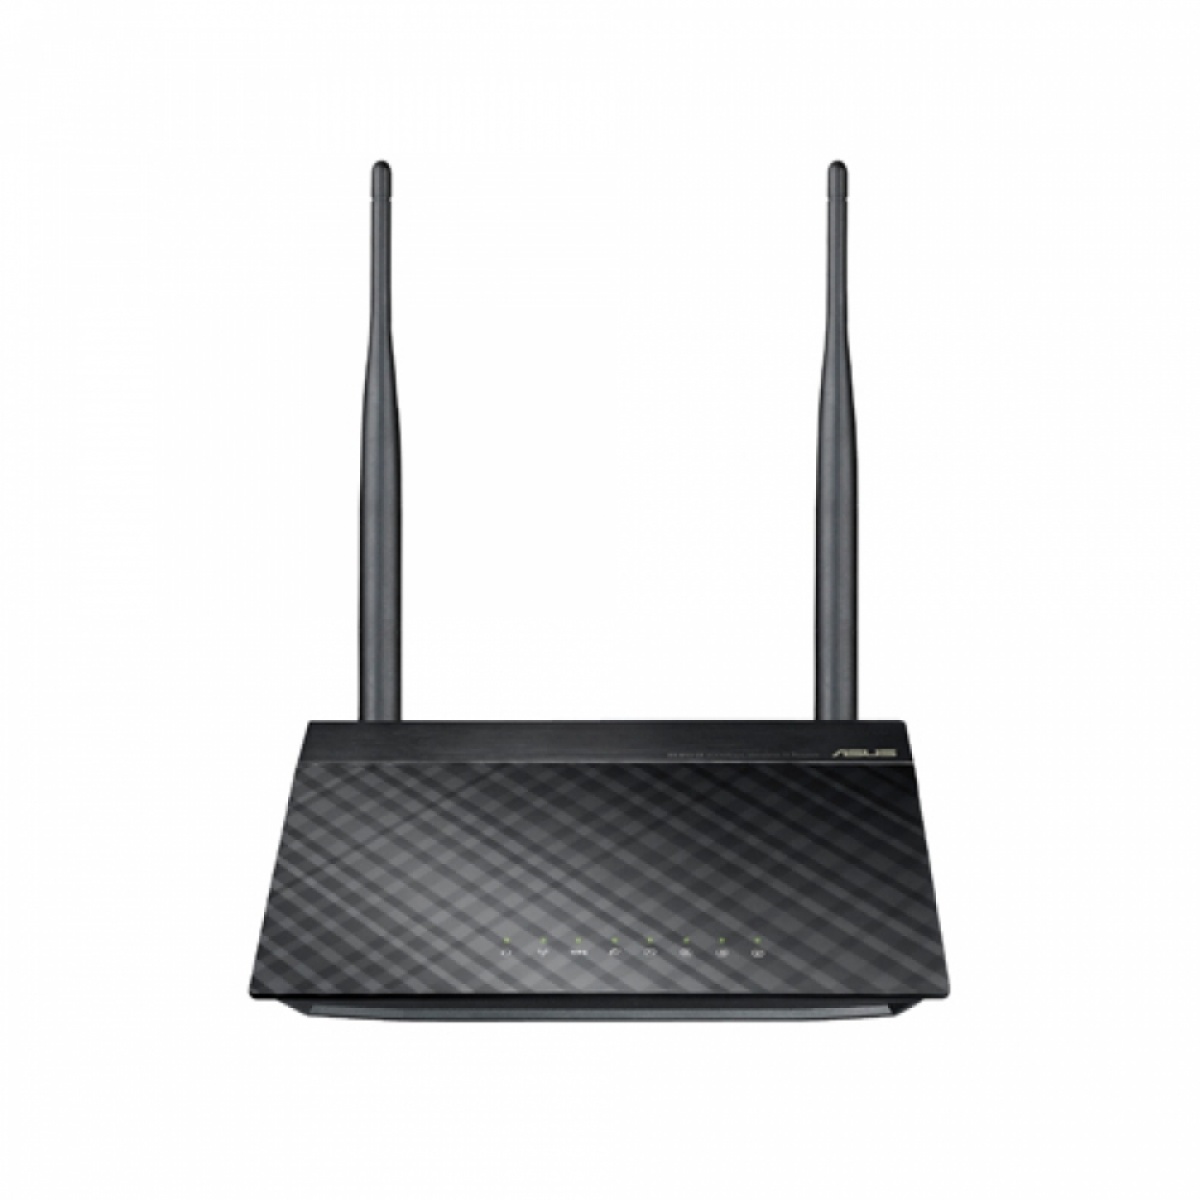 rt n12e wireless router ieee 80211n 300mbps embalagem danificada 90 ig29002m0